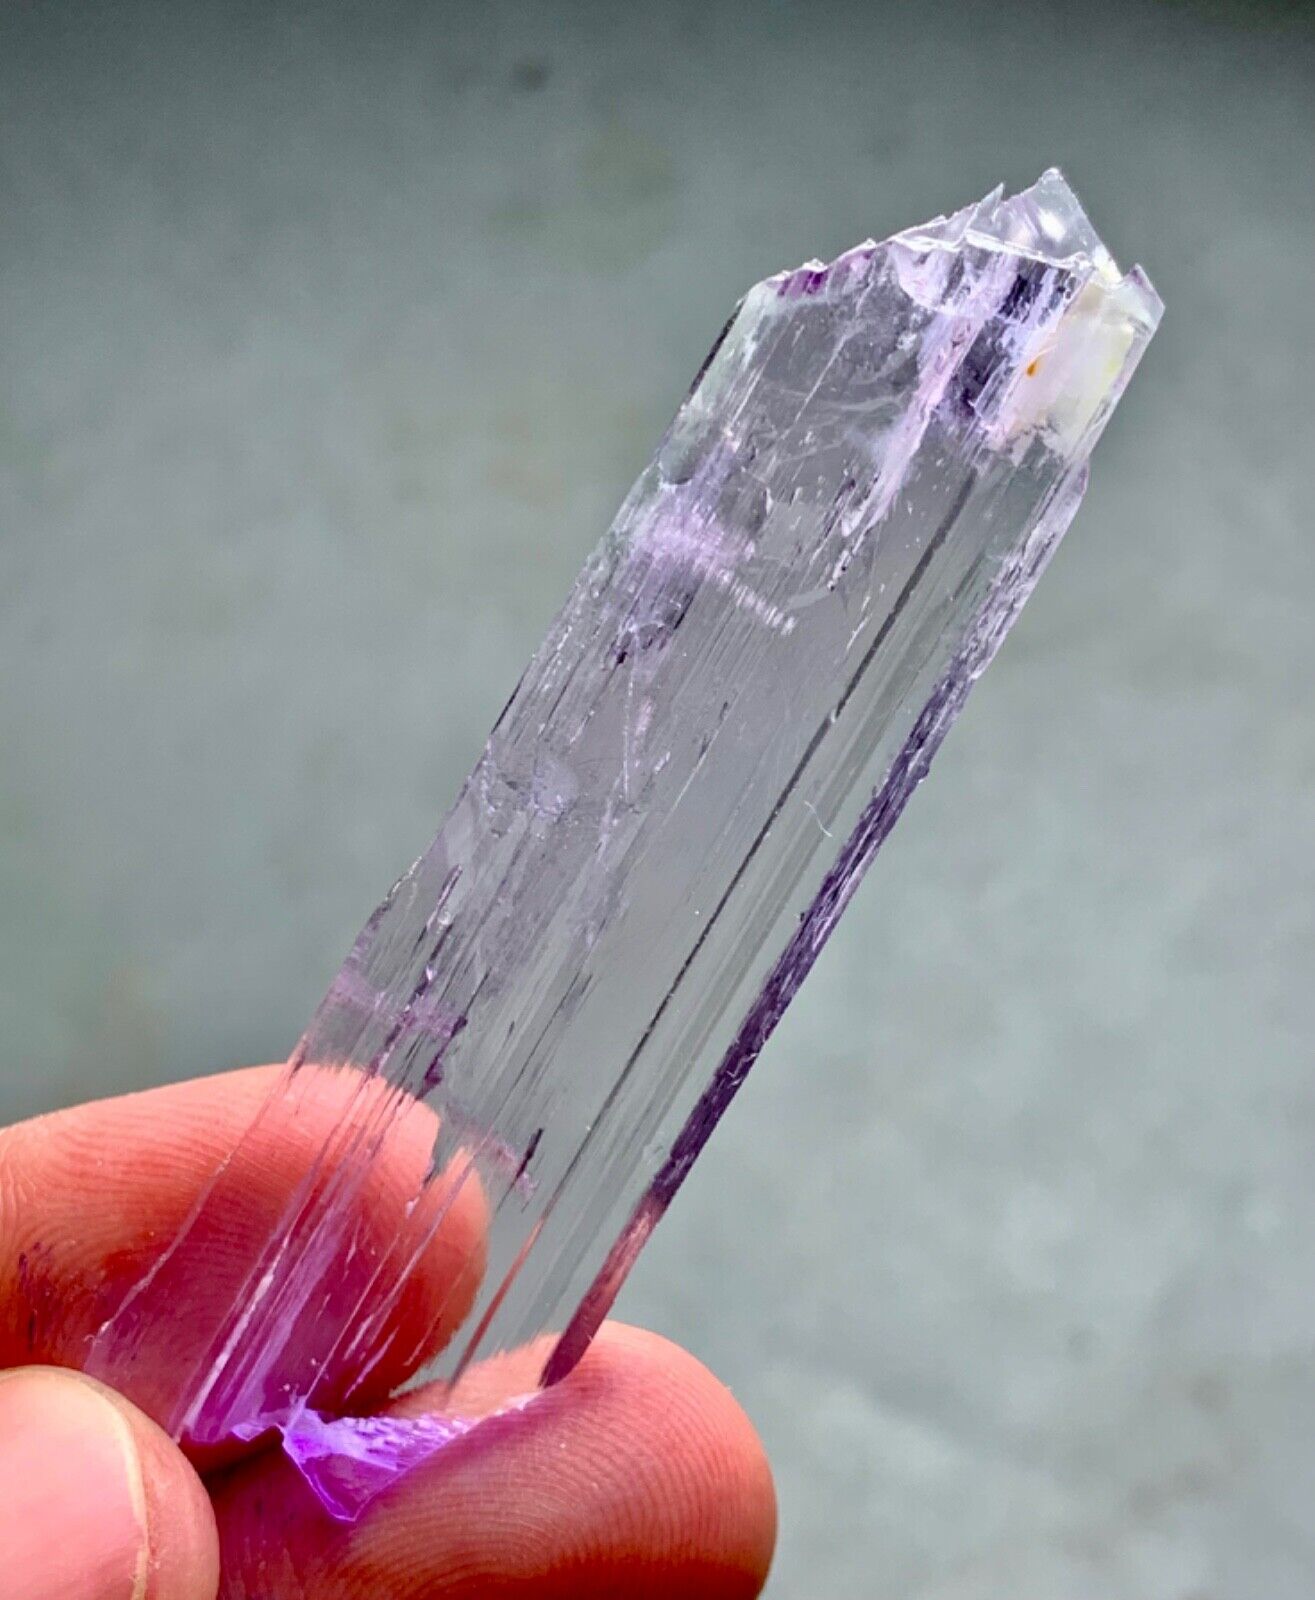 51 Carats Natural Pink Kunzite Crystal From Afghanistan